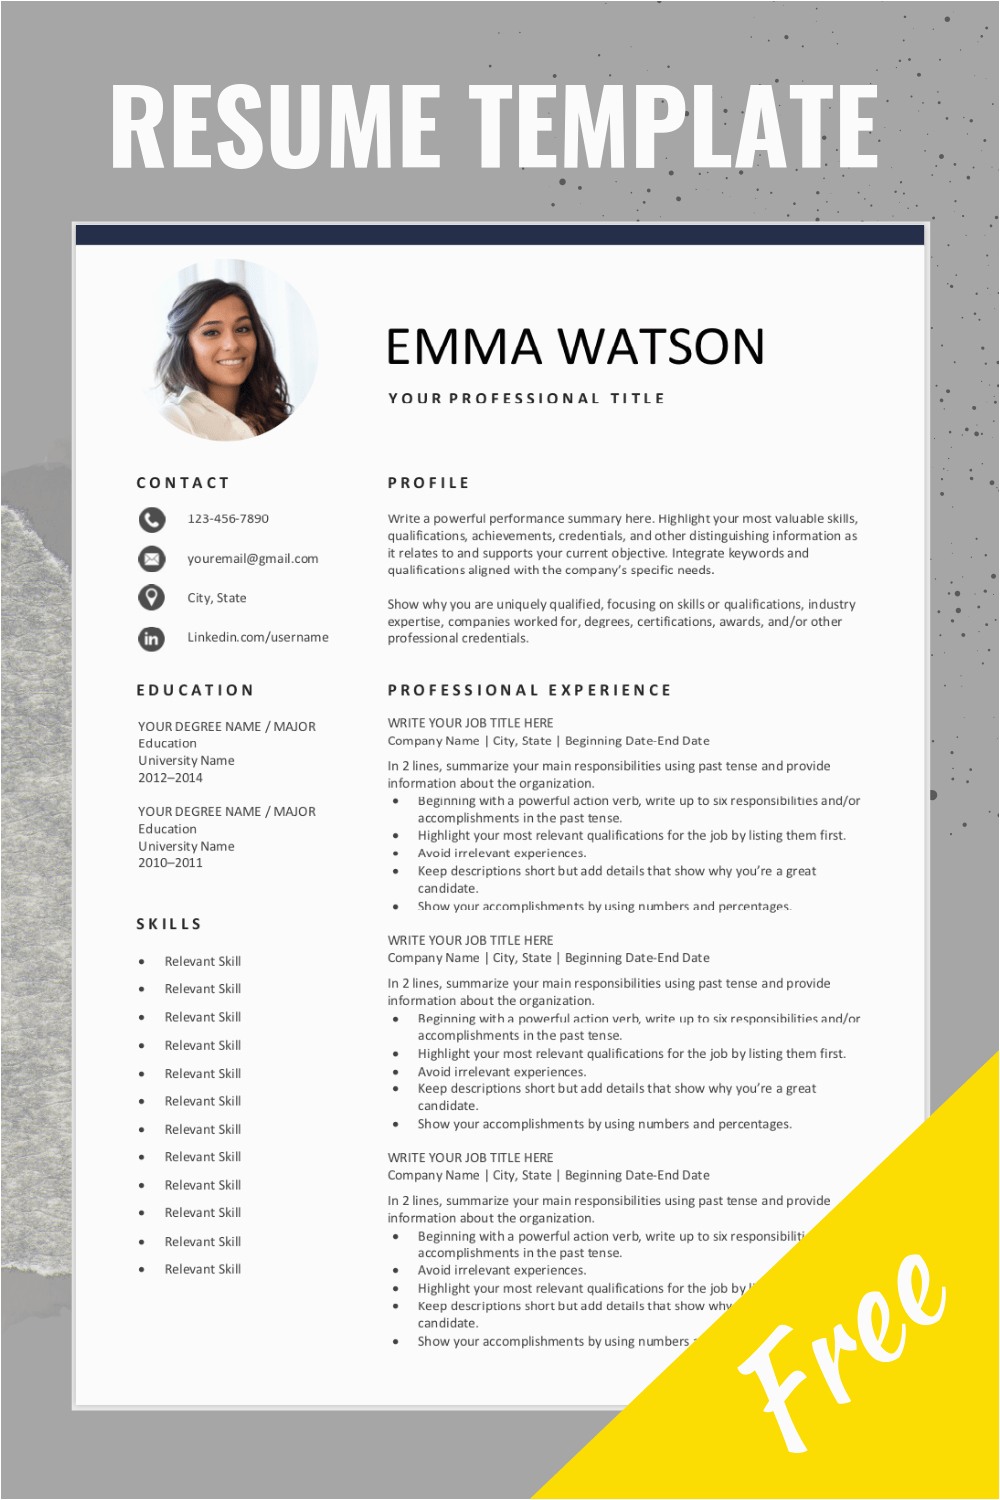 Professional Resume Free Resume Templates 2022 Resume Template Free Editable Layout are You Looking